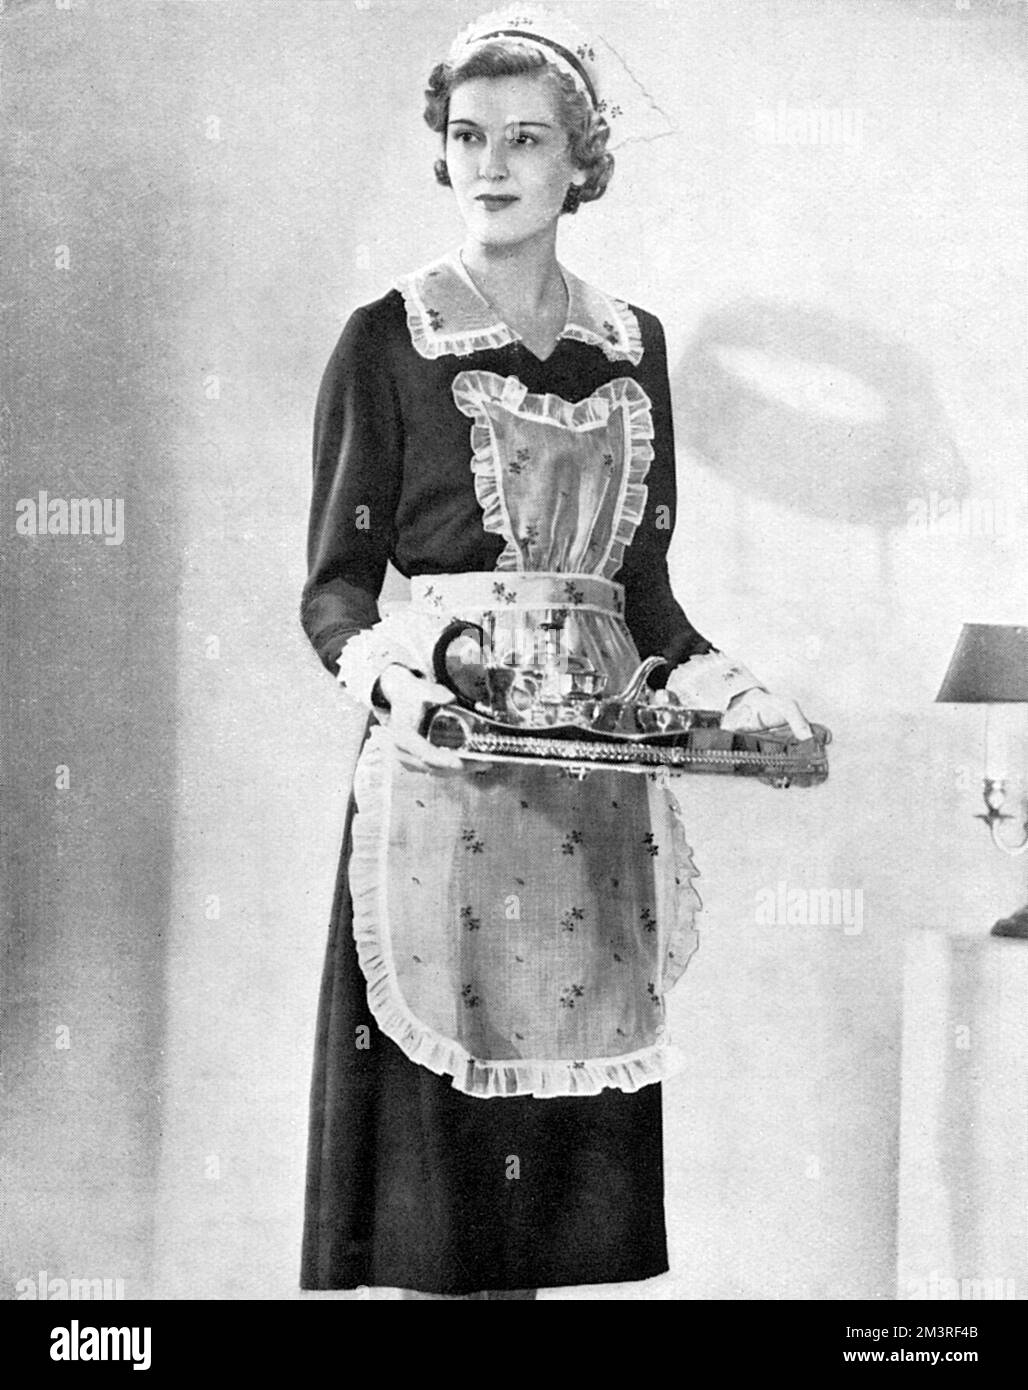 Advertisement for Garrould's of Edgware Road, London, highlighting their uniforms for staff.  'Distinguished hostesses who take a personal interest in their entertaining to express their artistry and good taste, select uniforms for their staff at Garrould's'.  The uniform shown comprises a white organdie apron with a wine blue or green embroidered sprig, cap to match with two goffered frills at top and bottom, velvet ribbon to match and collar and cuffs to match.       Date: 1938 Stock Photo